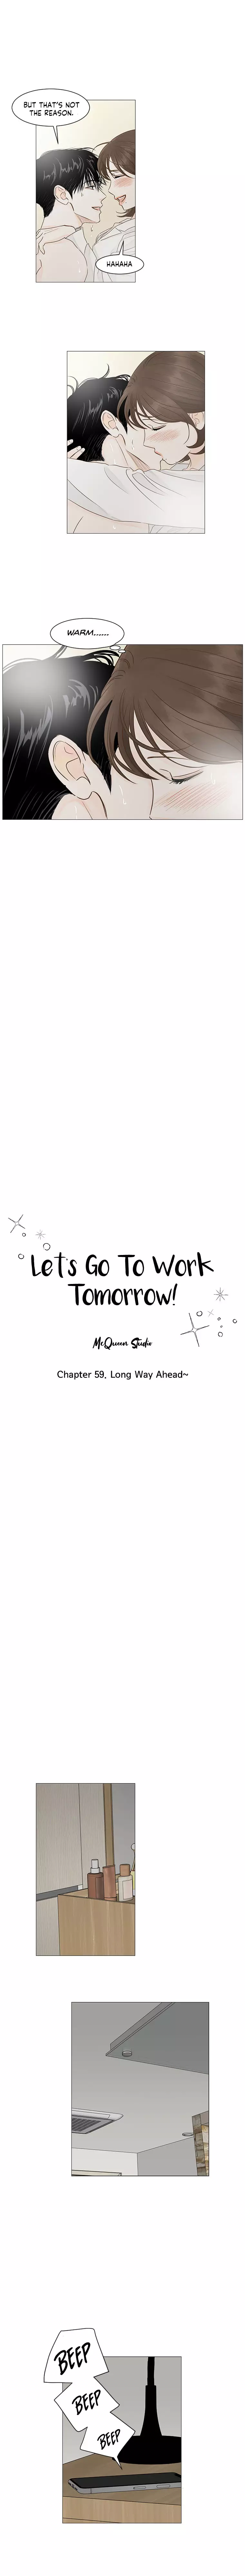 Let's Go To Work Tomorrow! - 59 page 3